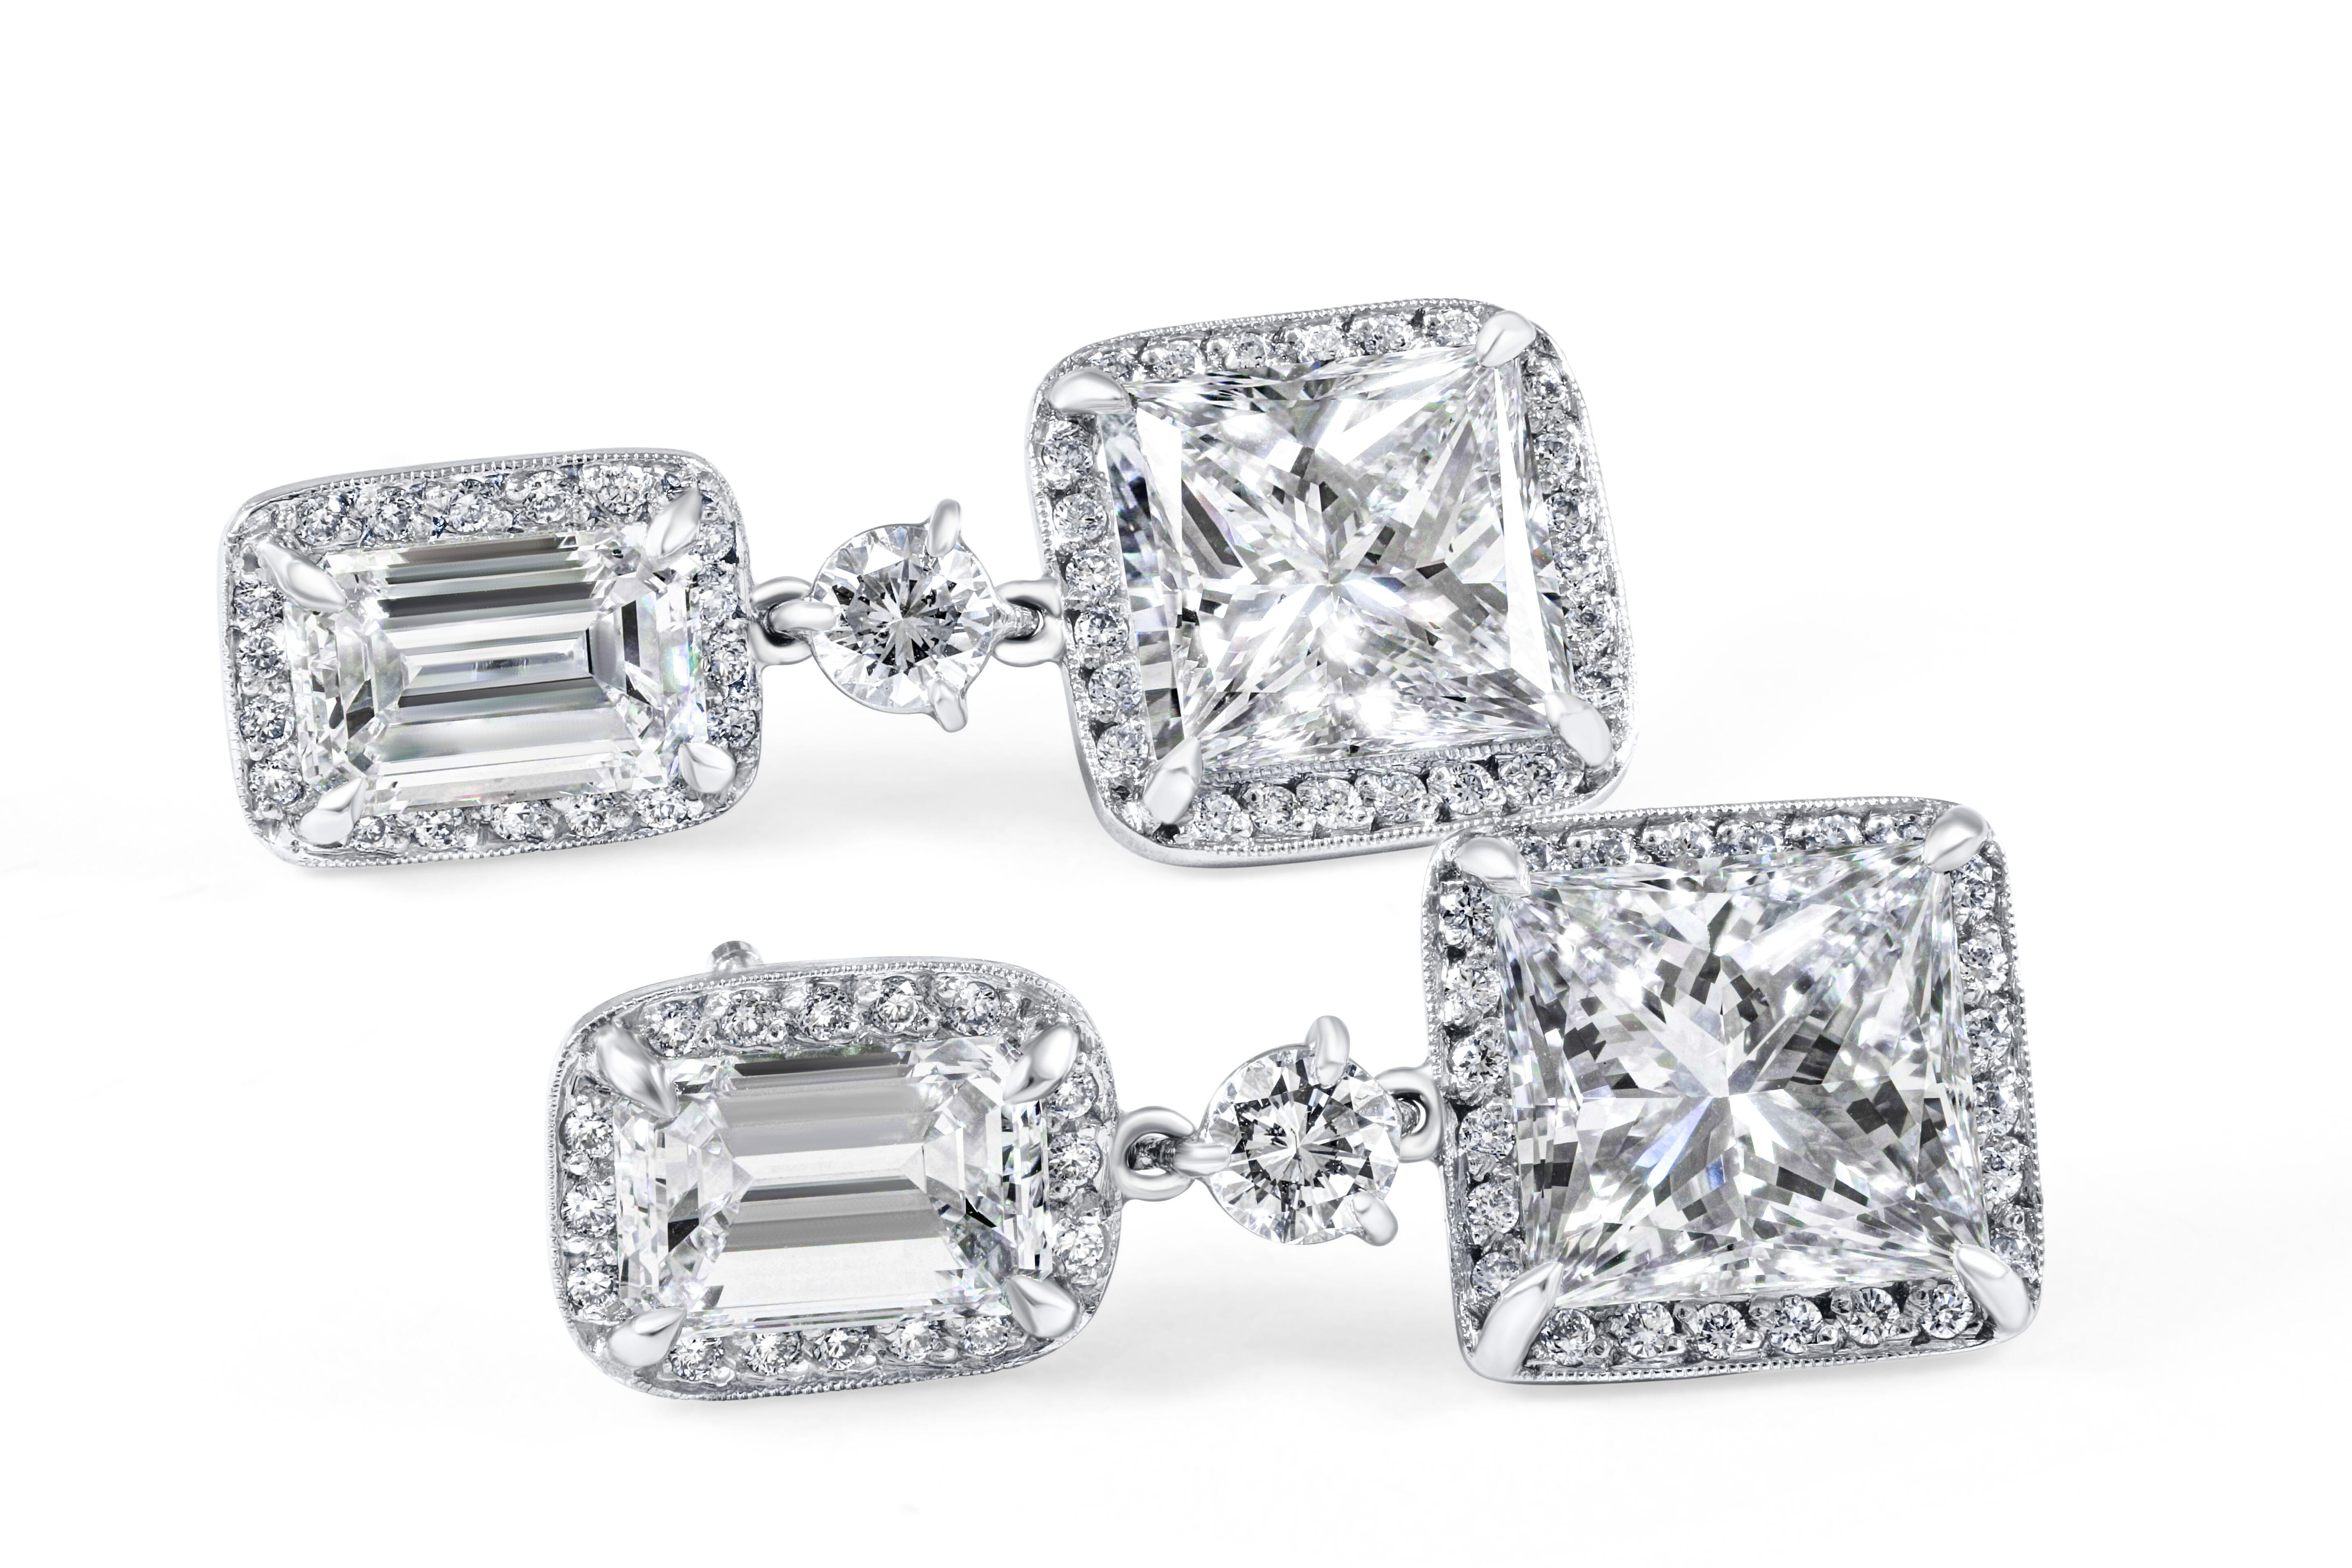 Rivièra Platinum Princess and Emerald Diamond Drop Earrings exclusively designed and created in-house at CJ Charles Jewelers. These spectacular earrings are crafted from platinum, and set with GIA certified 1.08ct and 1.05ct emerald cut diamonds,